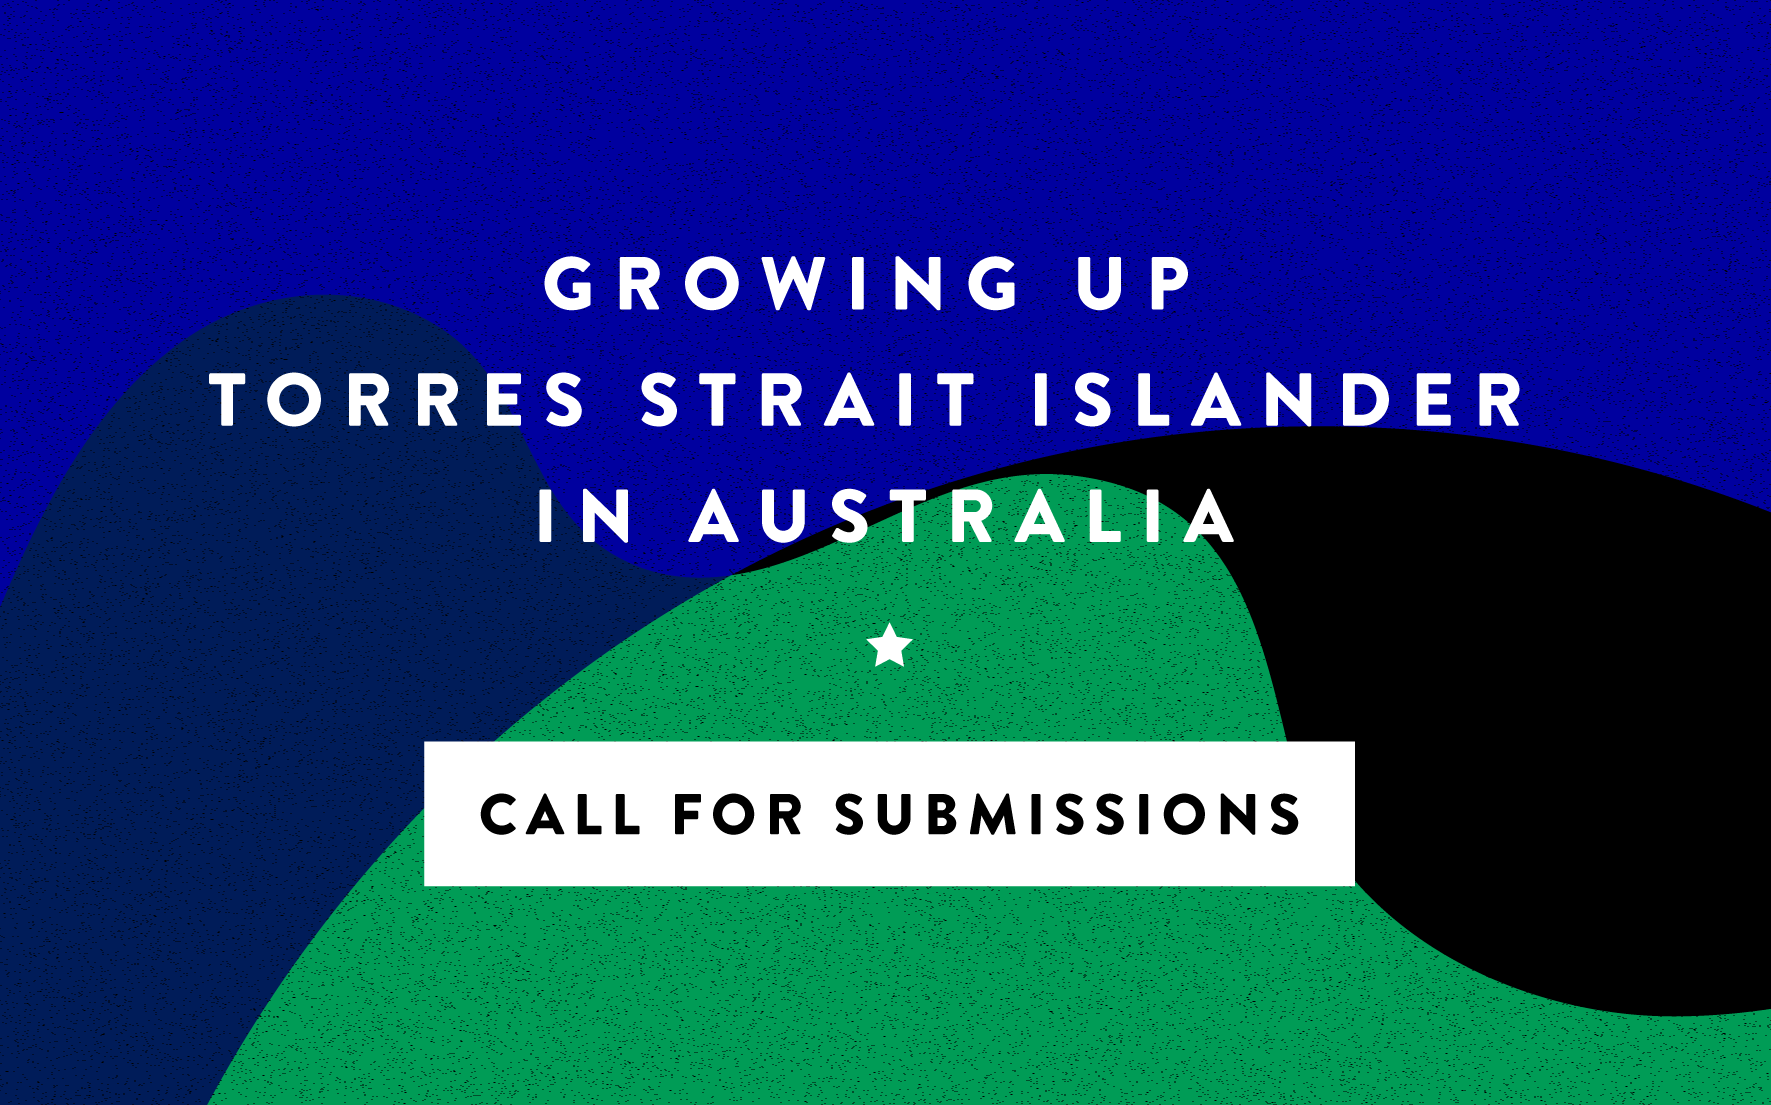 Growing Up Torres Strait Islander in Australia: Call for submissions